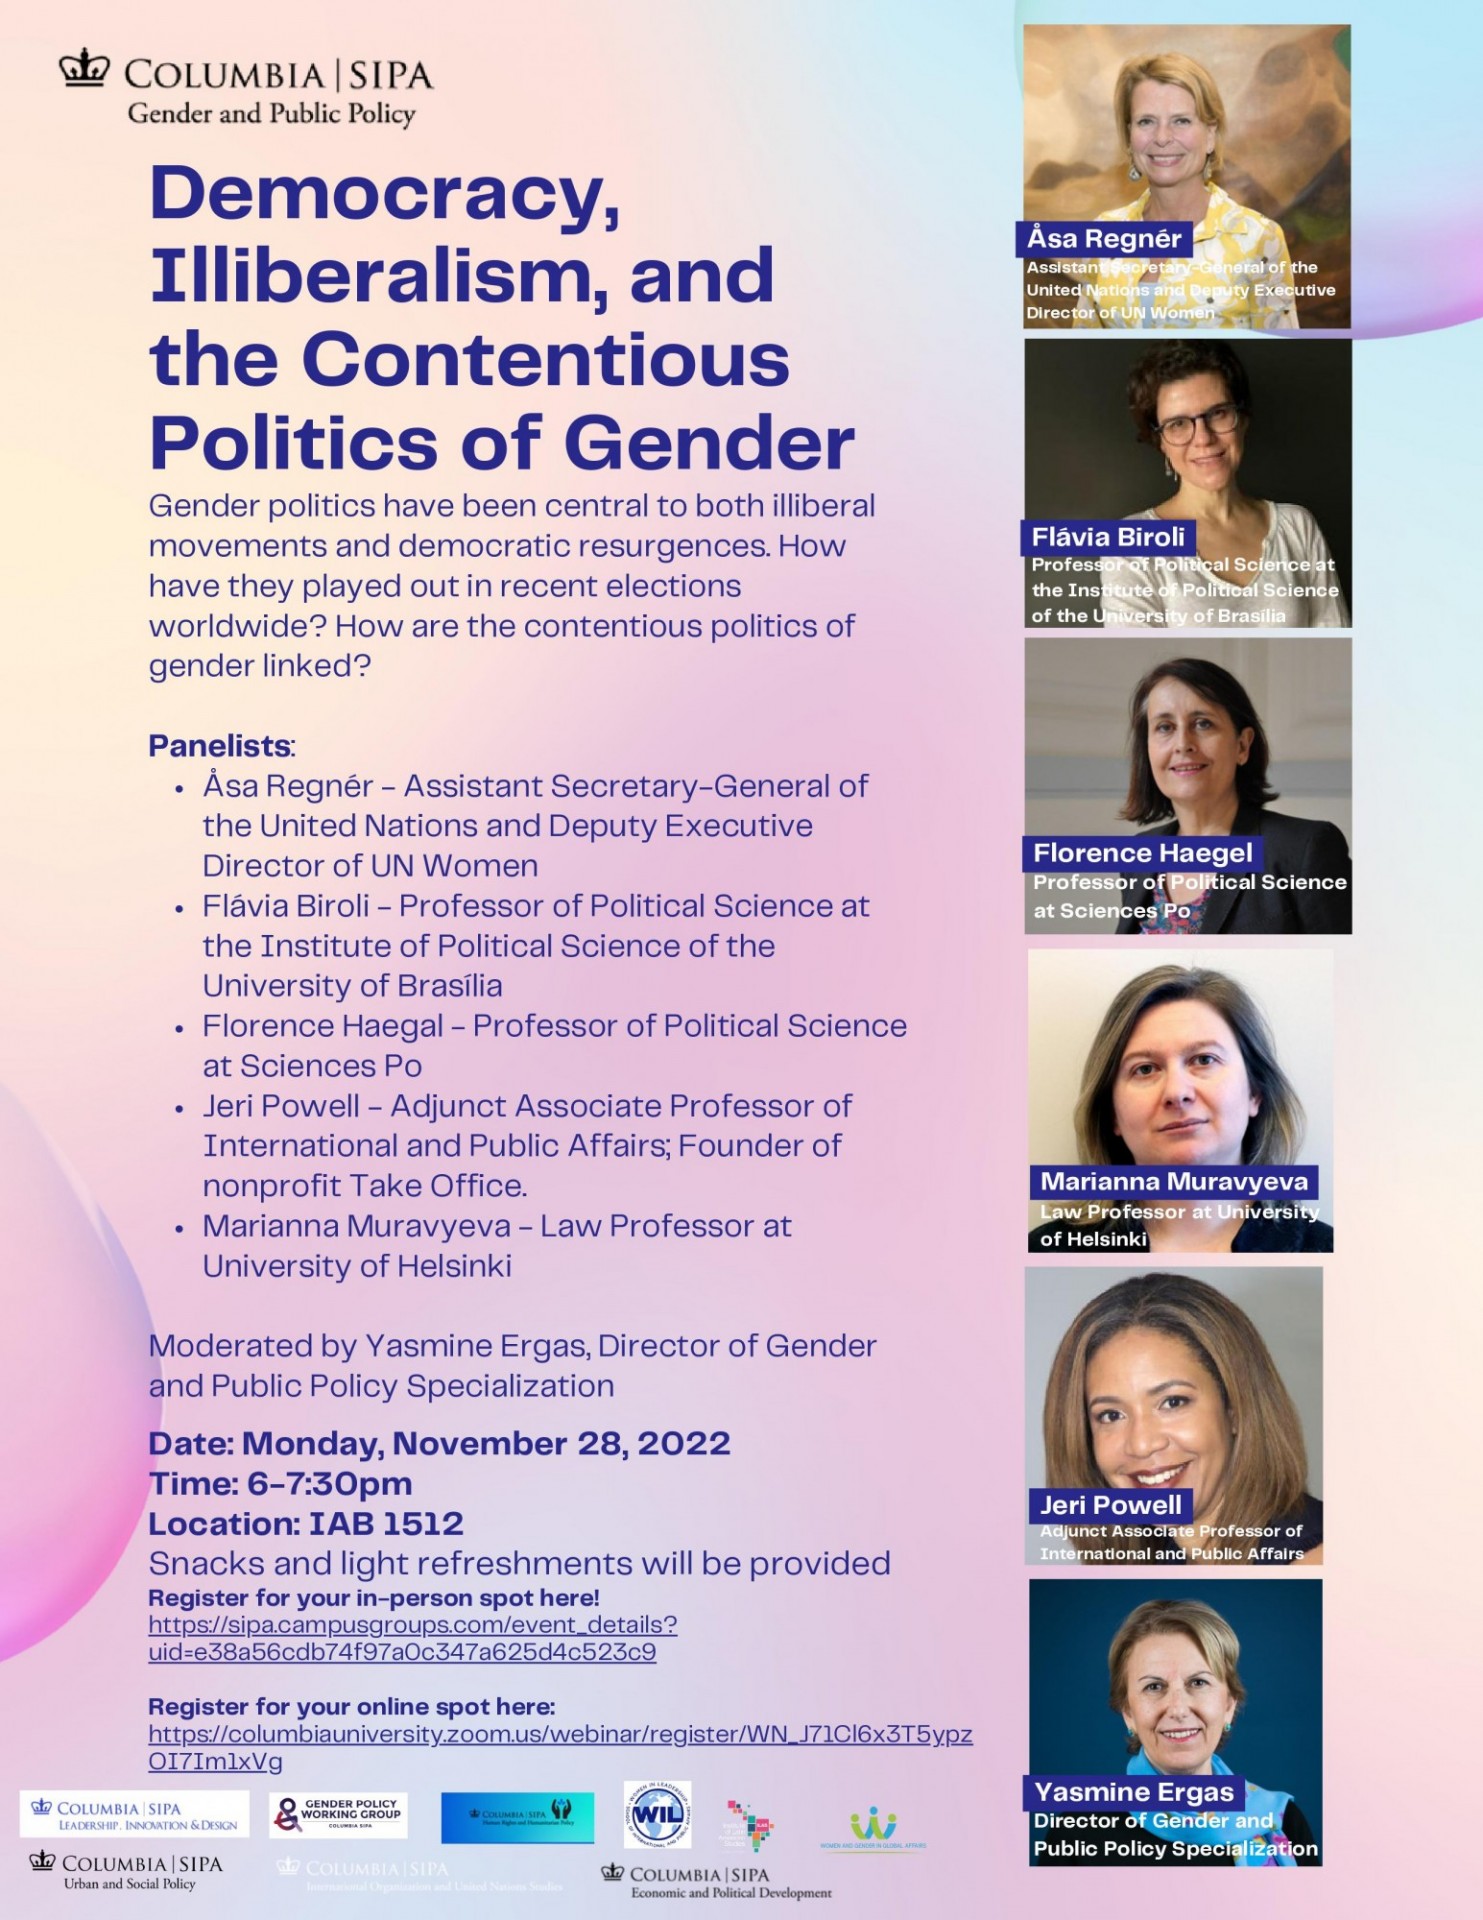 Democracy, Illiberalism, and the Contentious Politics of Gender